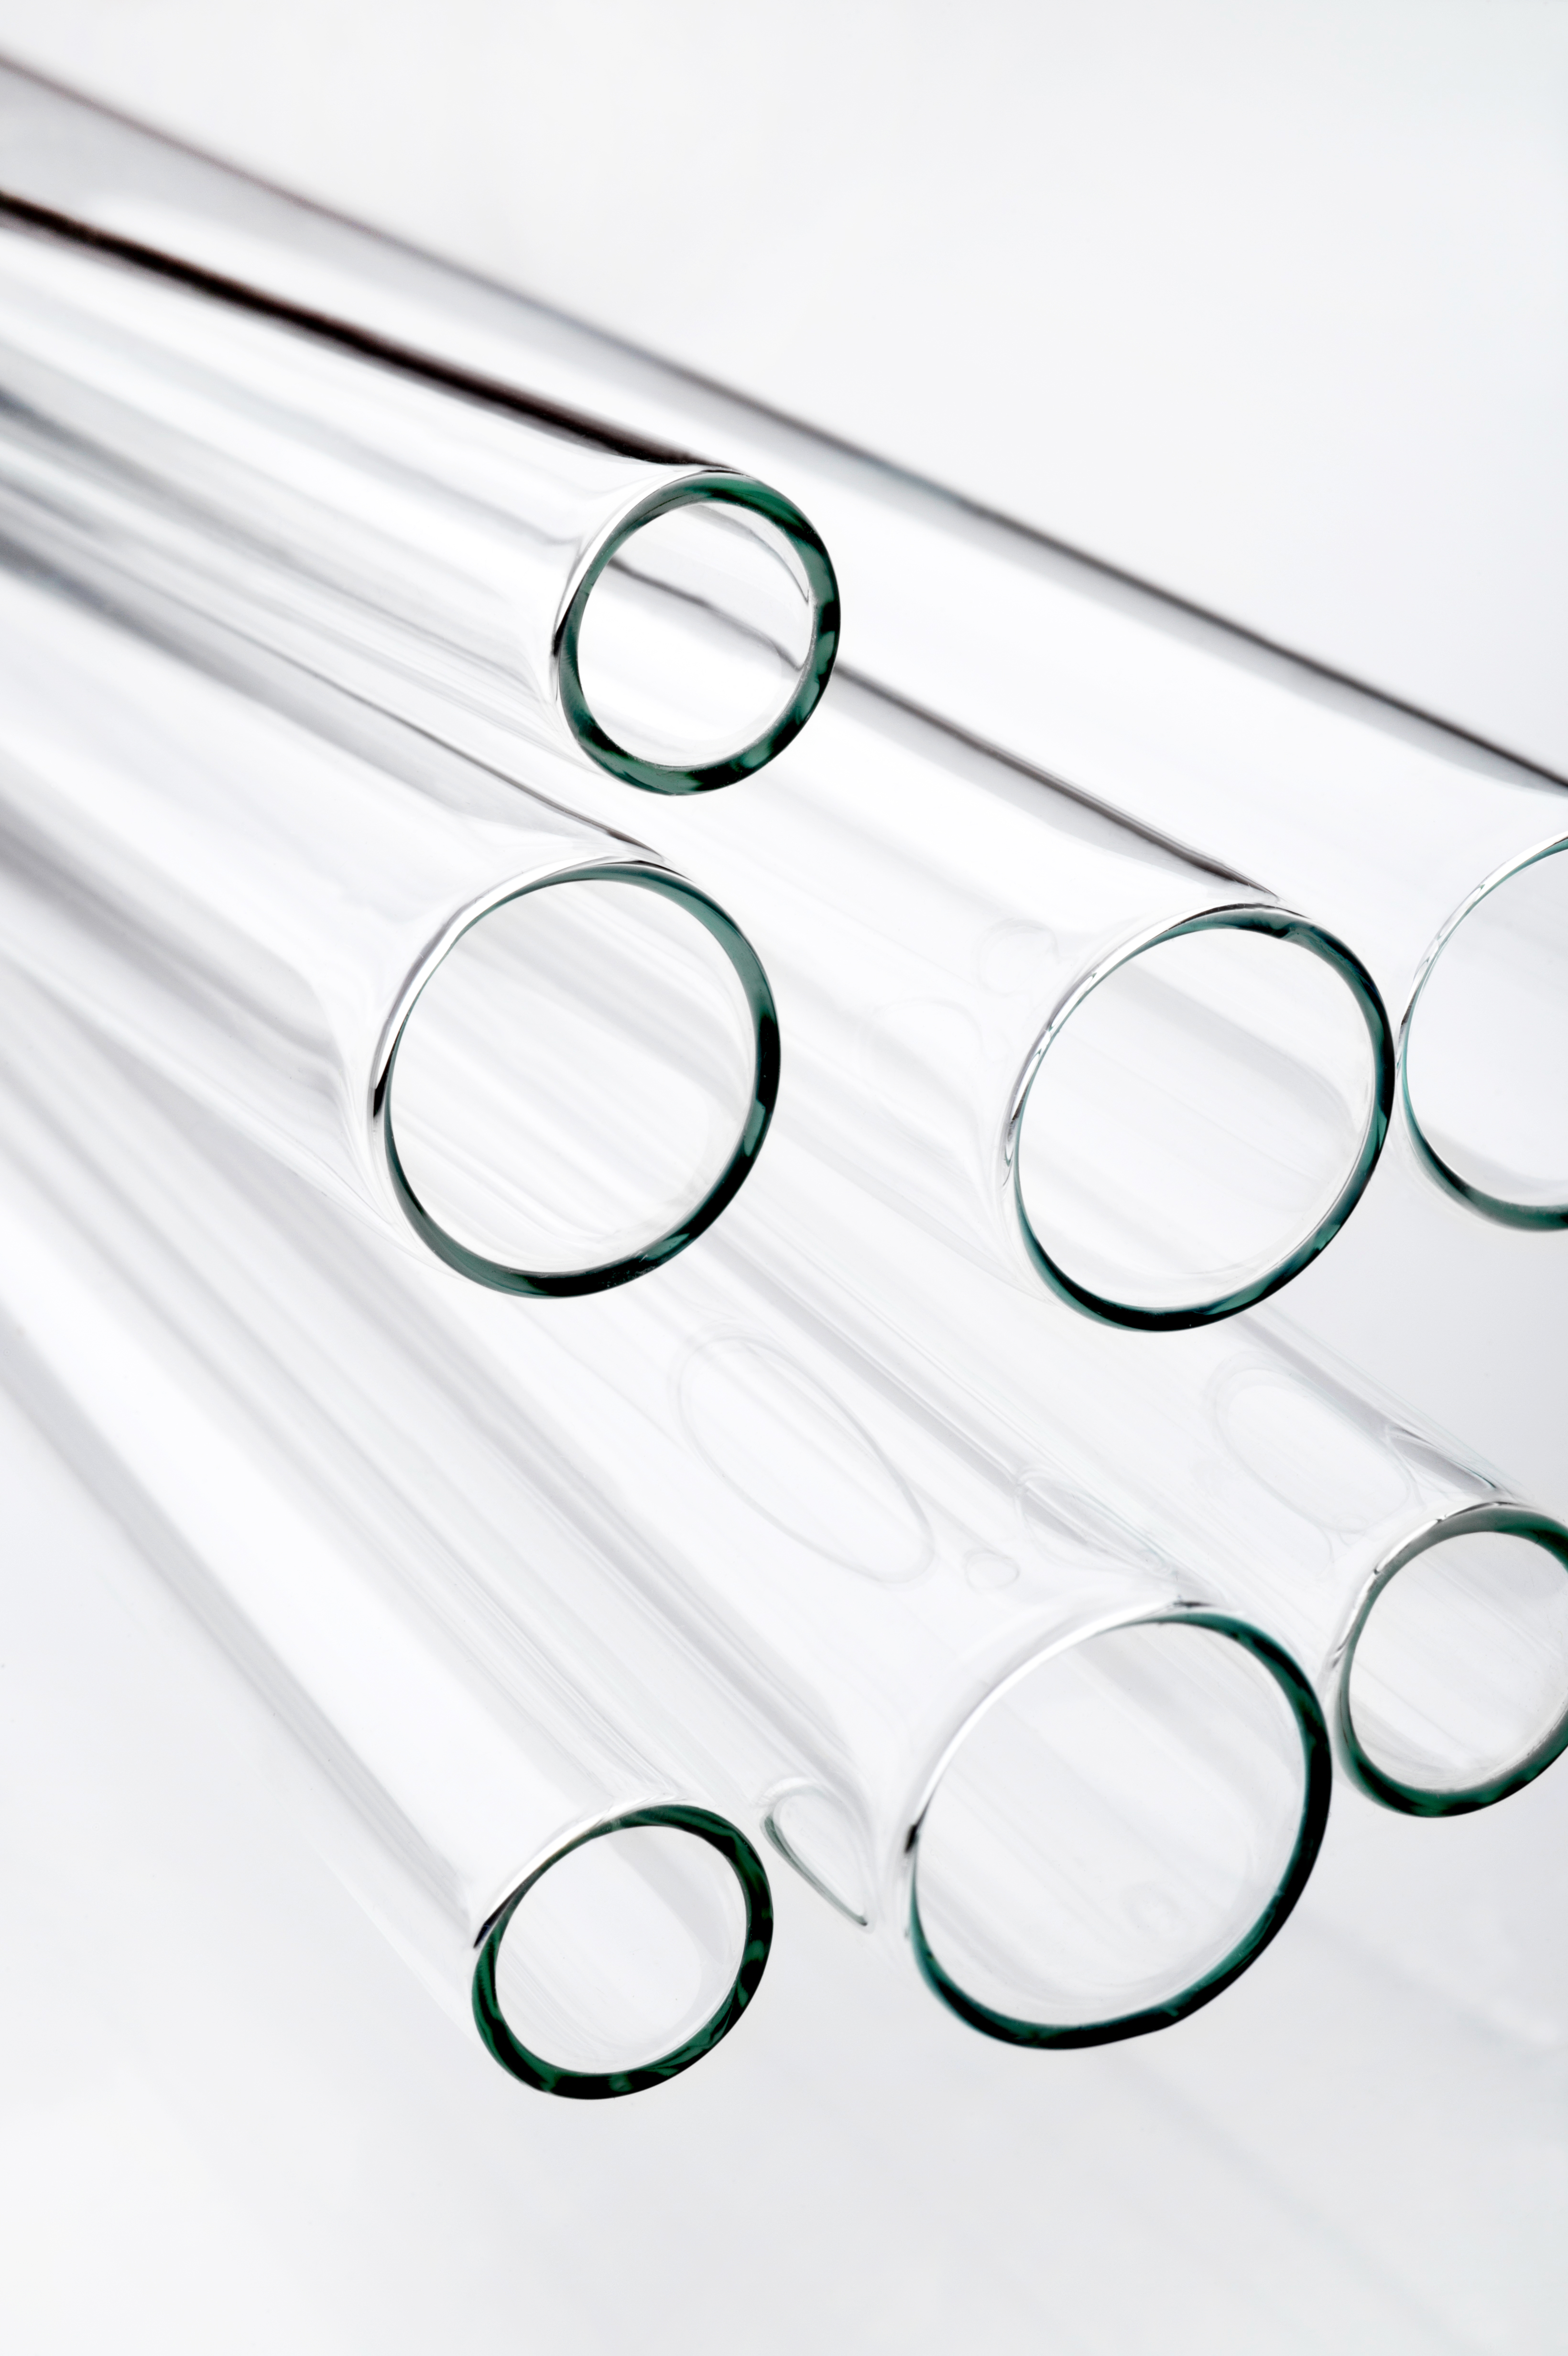 What Is Borosilicate Glass And Why Is It Better Than Regular Glass? – Kablo